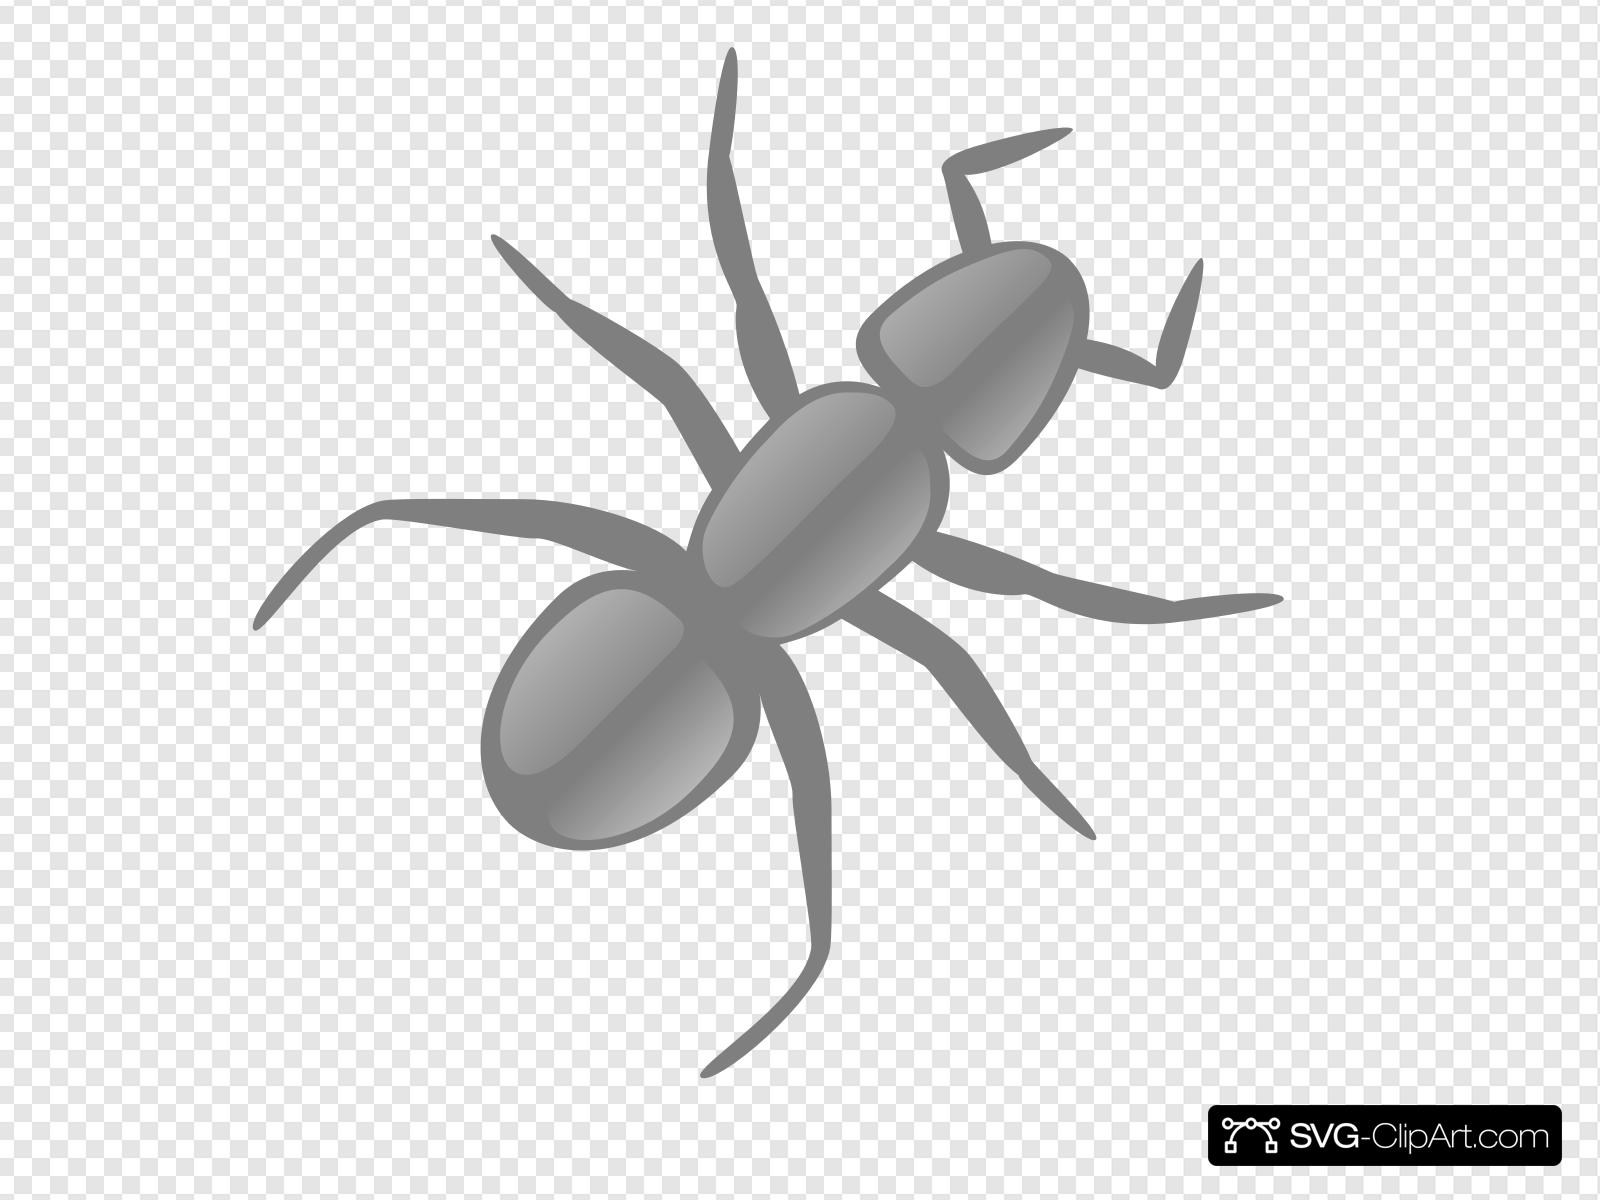 Clip art icon and. Ant clipart gray